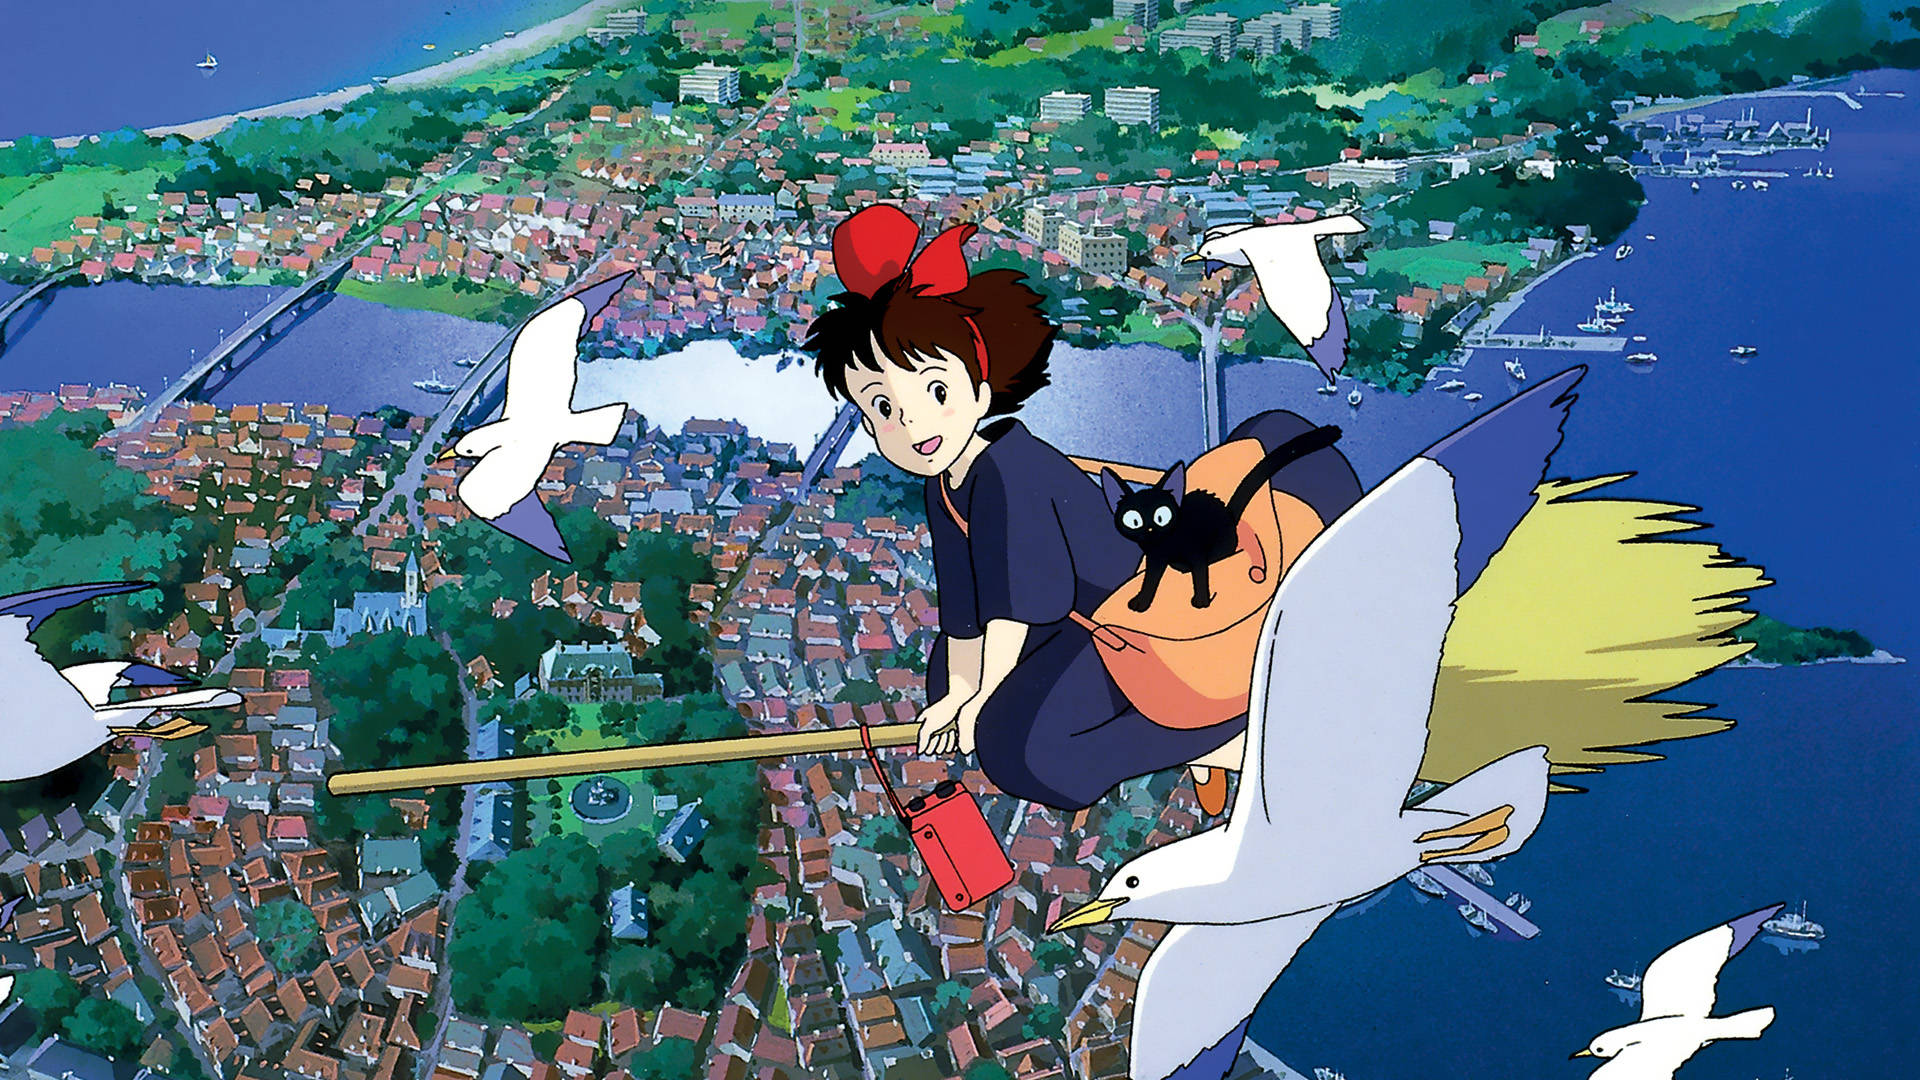 Kiki With Birds From Kikis Delivery Service Wallpaper